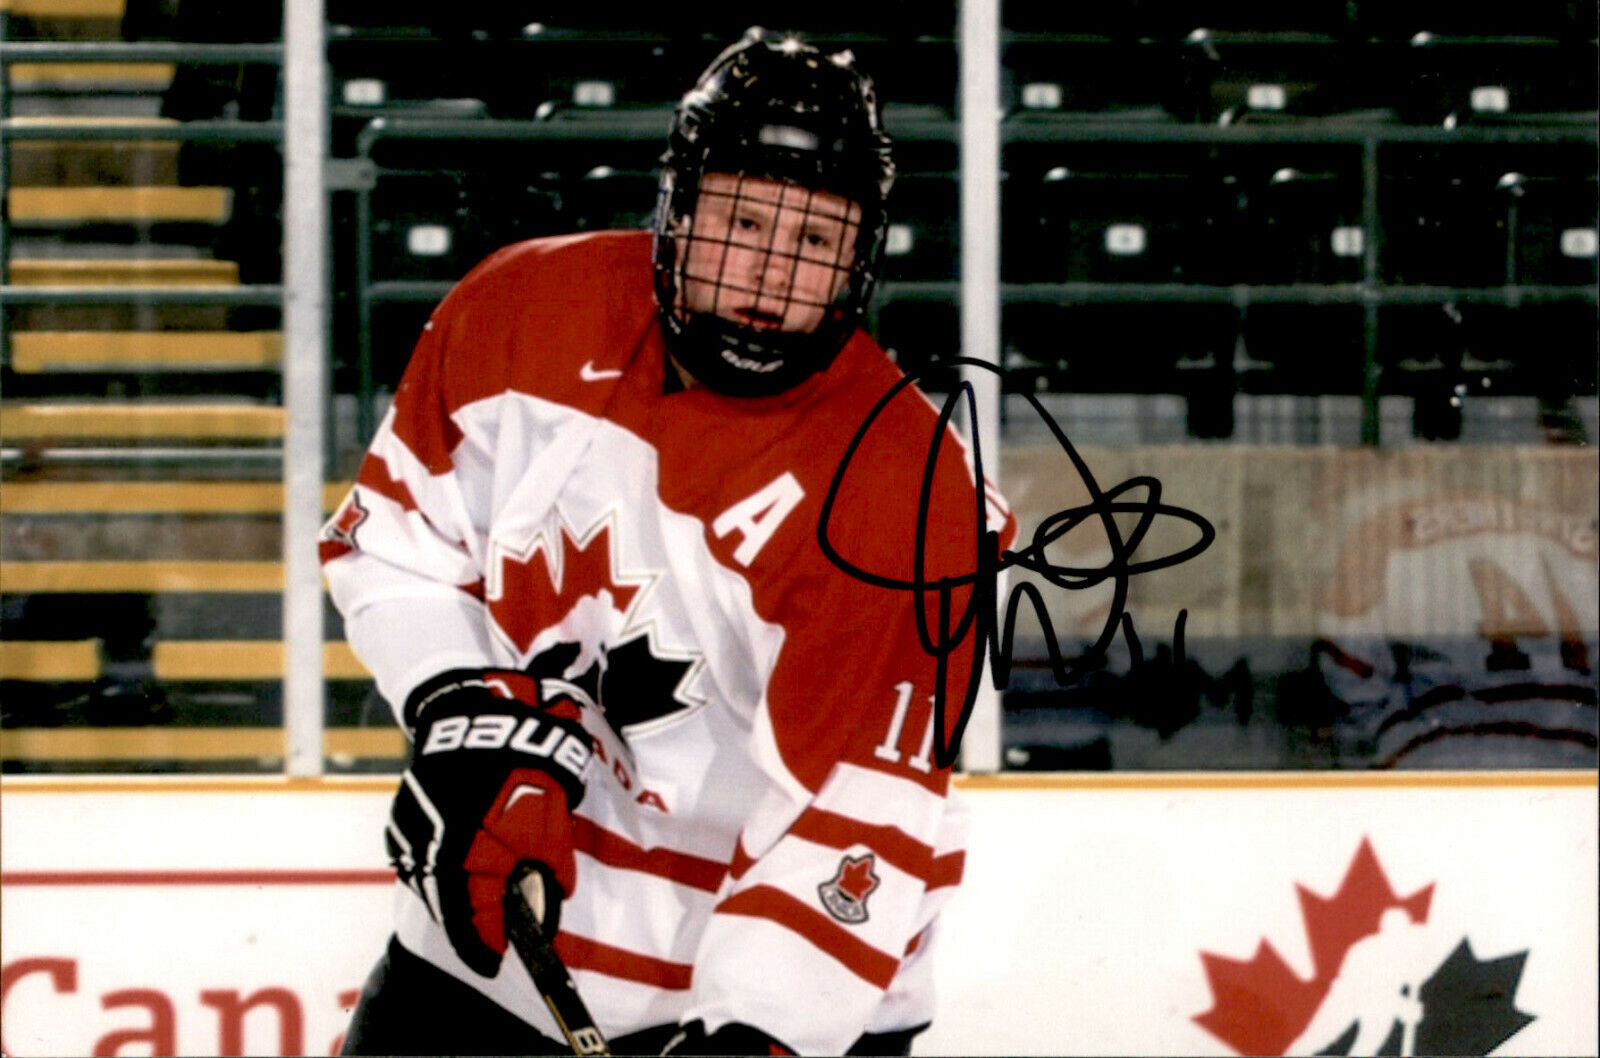 Jaret Anderson-Dolan SIGNED autograph 4x6 Photo Poster painting TEAM CANADA / LOS ANGELES KINGS